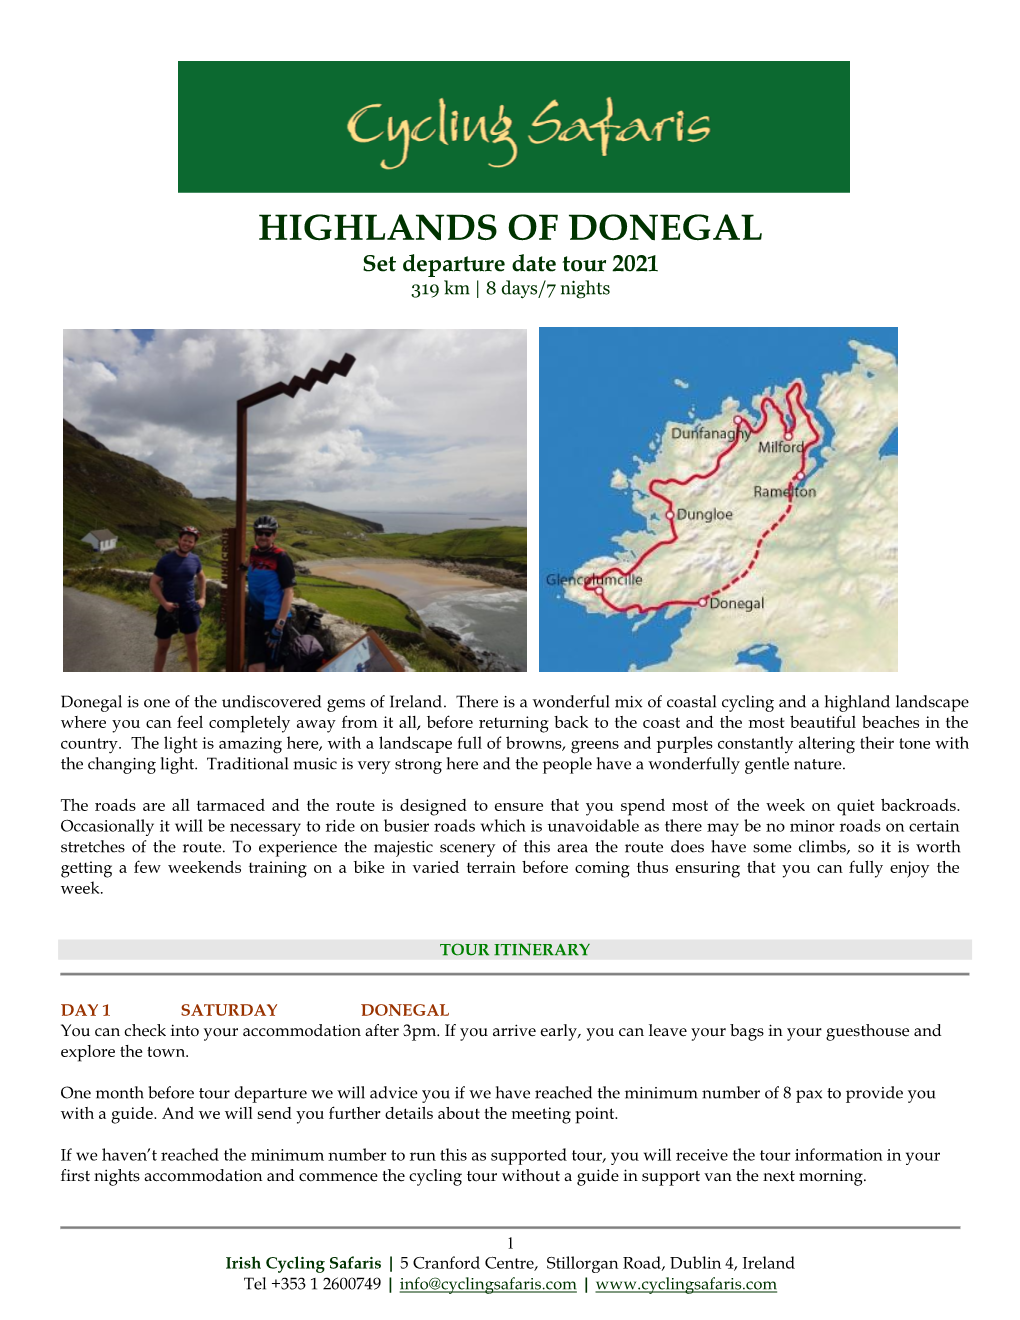 HIGHLANDS of DONEGAL Set Departure Date Tour 2021 319 Km | 8 Days/7 Nights